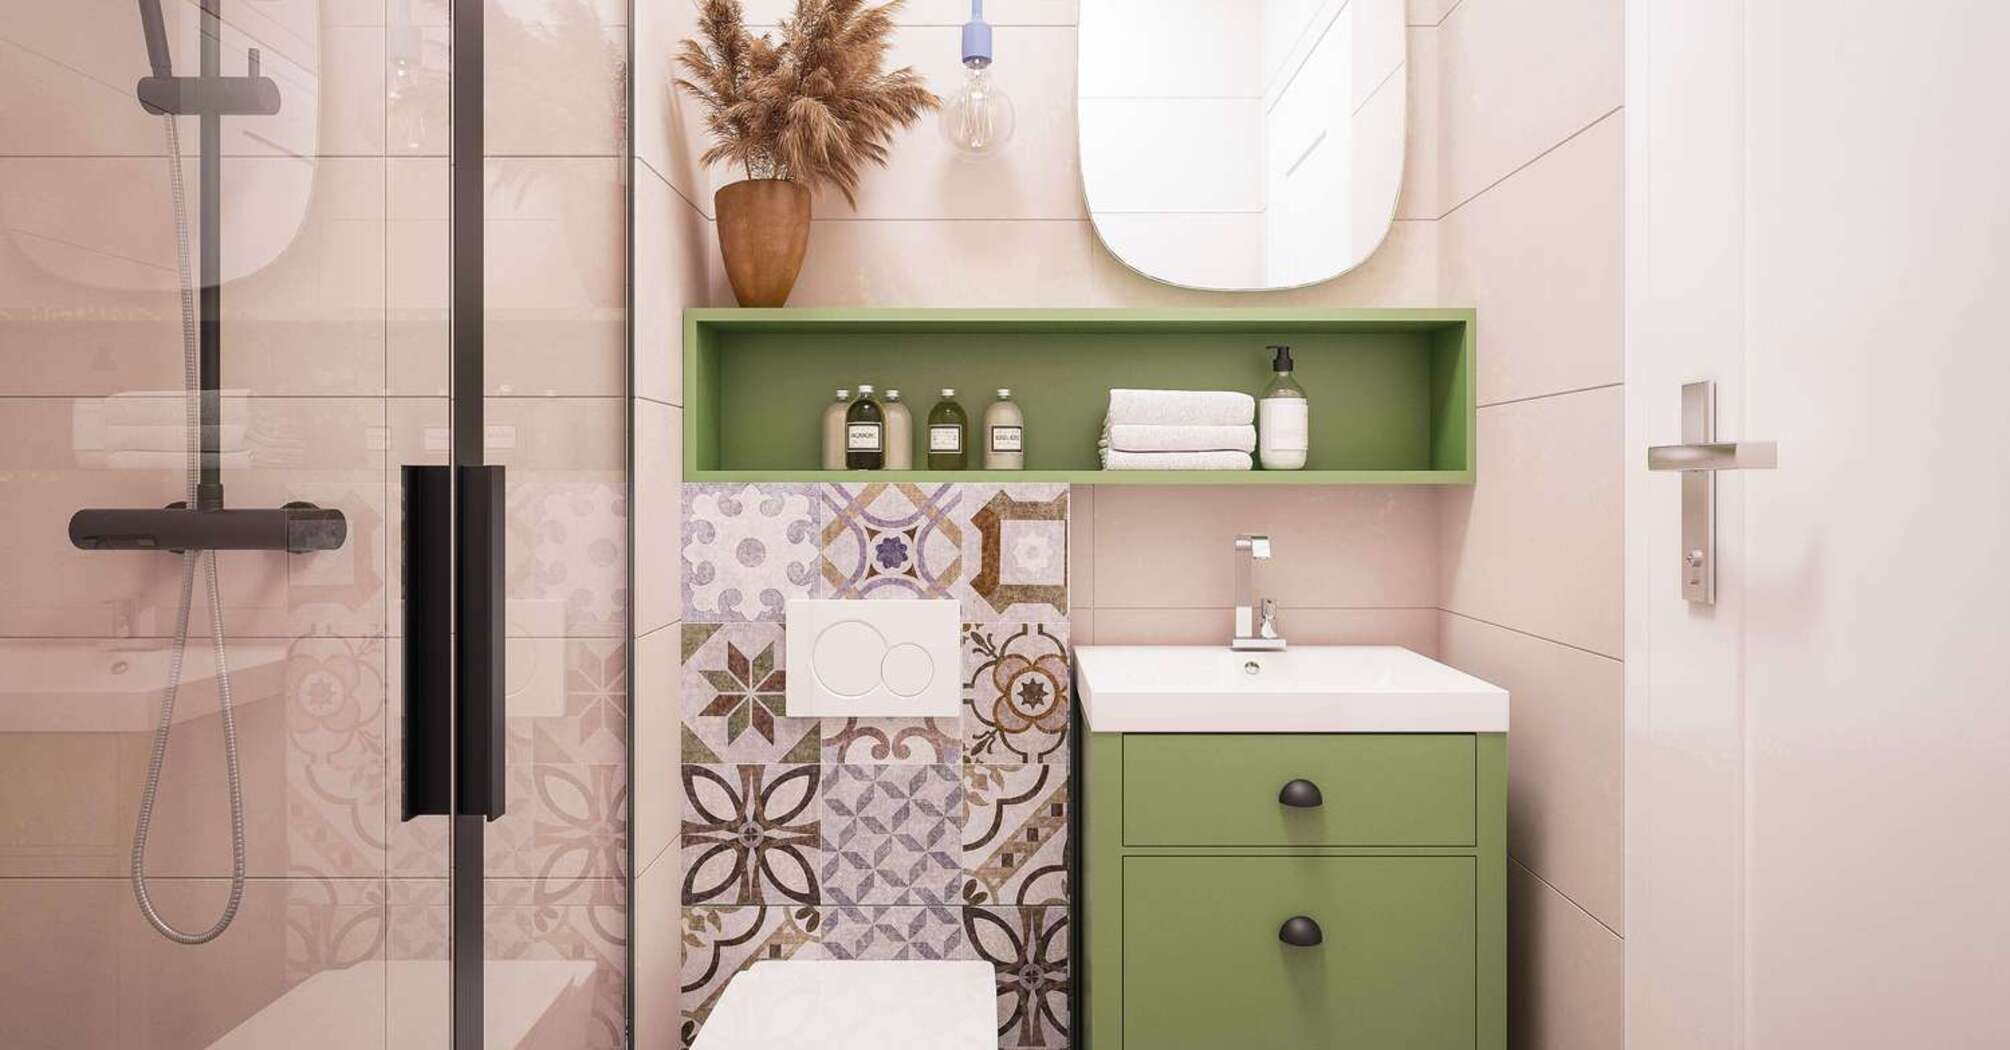 How to optimize the small bathroom